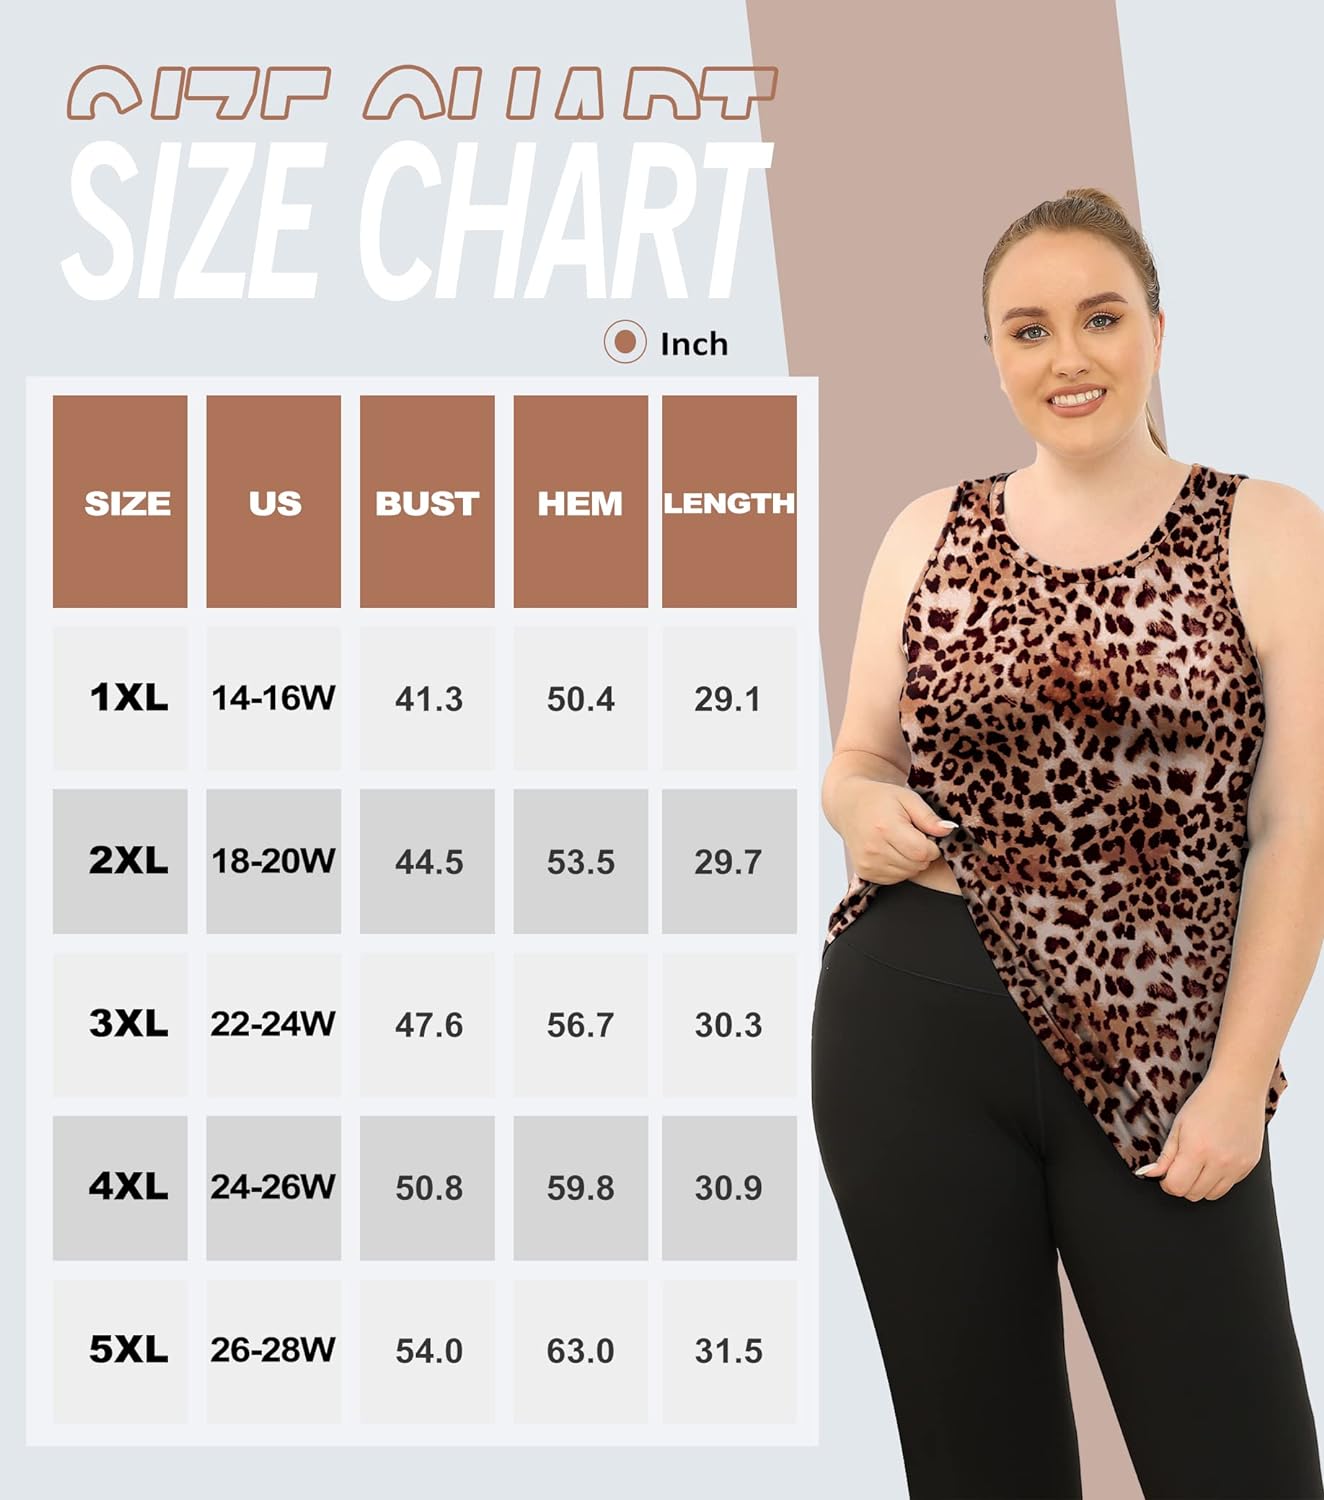 COOTRY Womens Plus Size Workout Tank Tops: A Review of the Perfect Athletic Gym Clothes